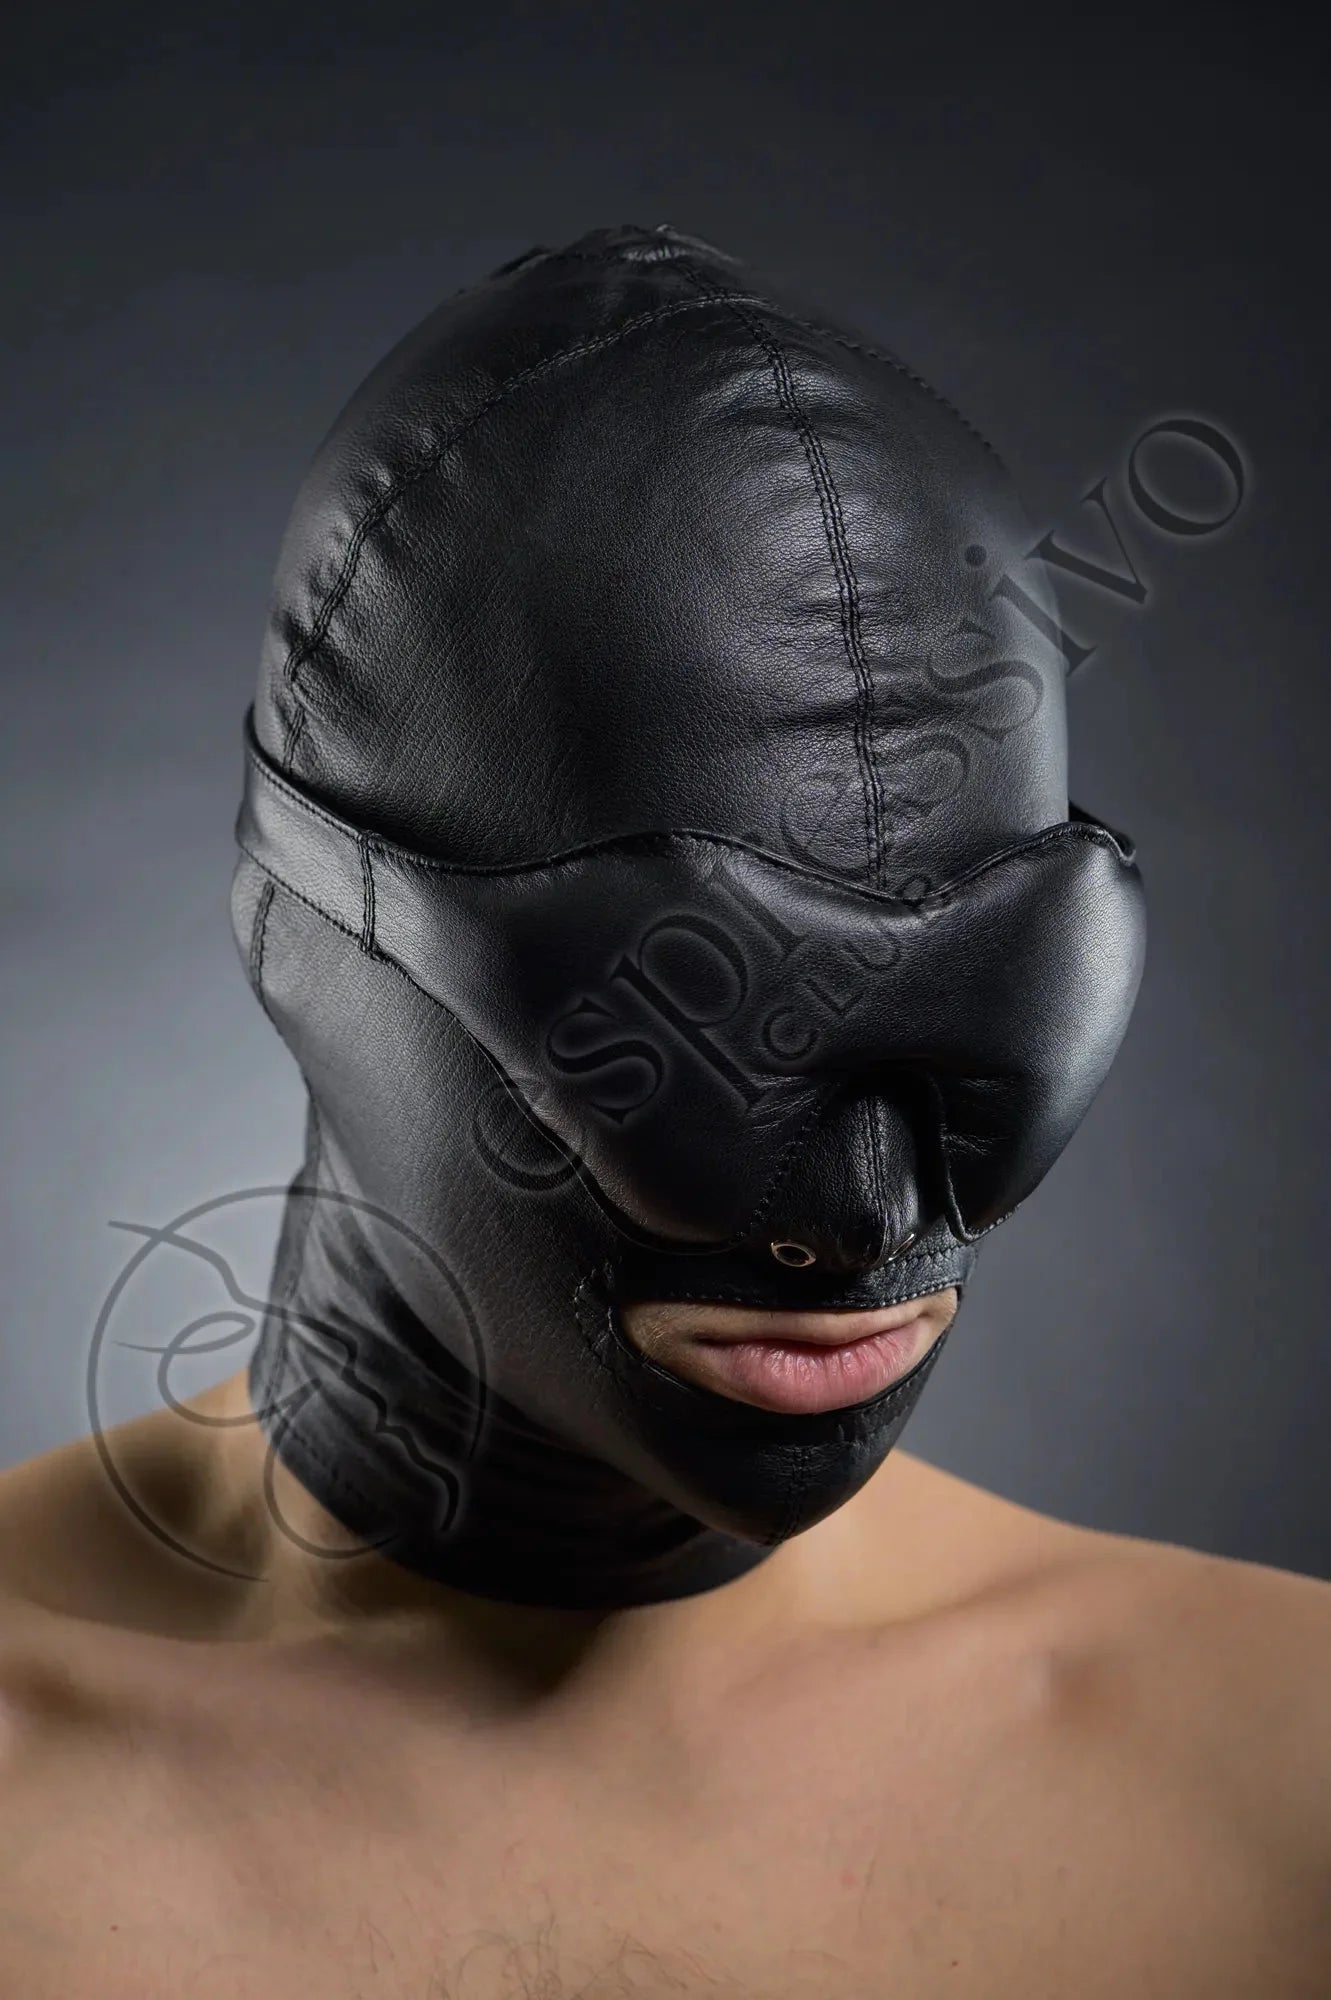 Real Leather Bondage Set of Tight BDSM Hood with Leather Blindfold and Muffle Gag